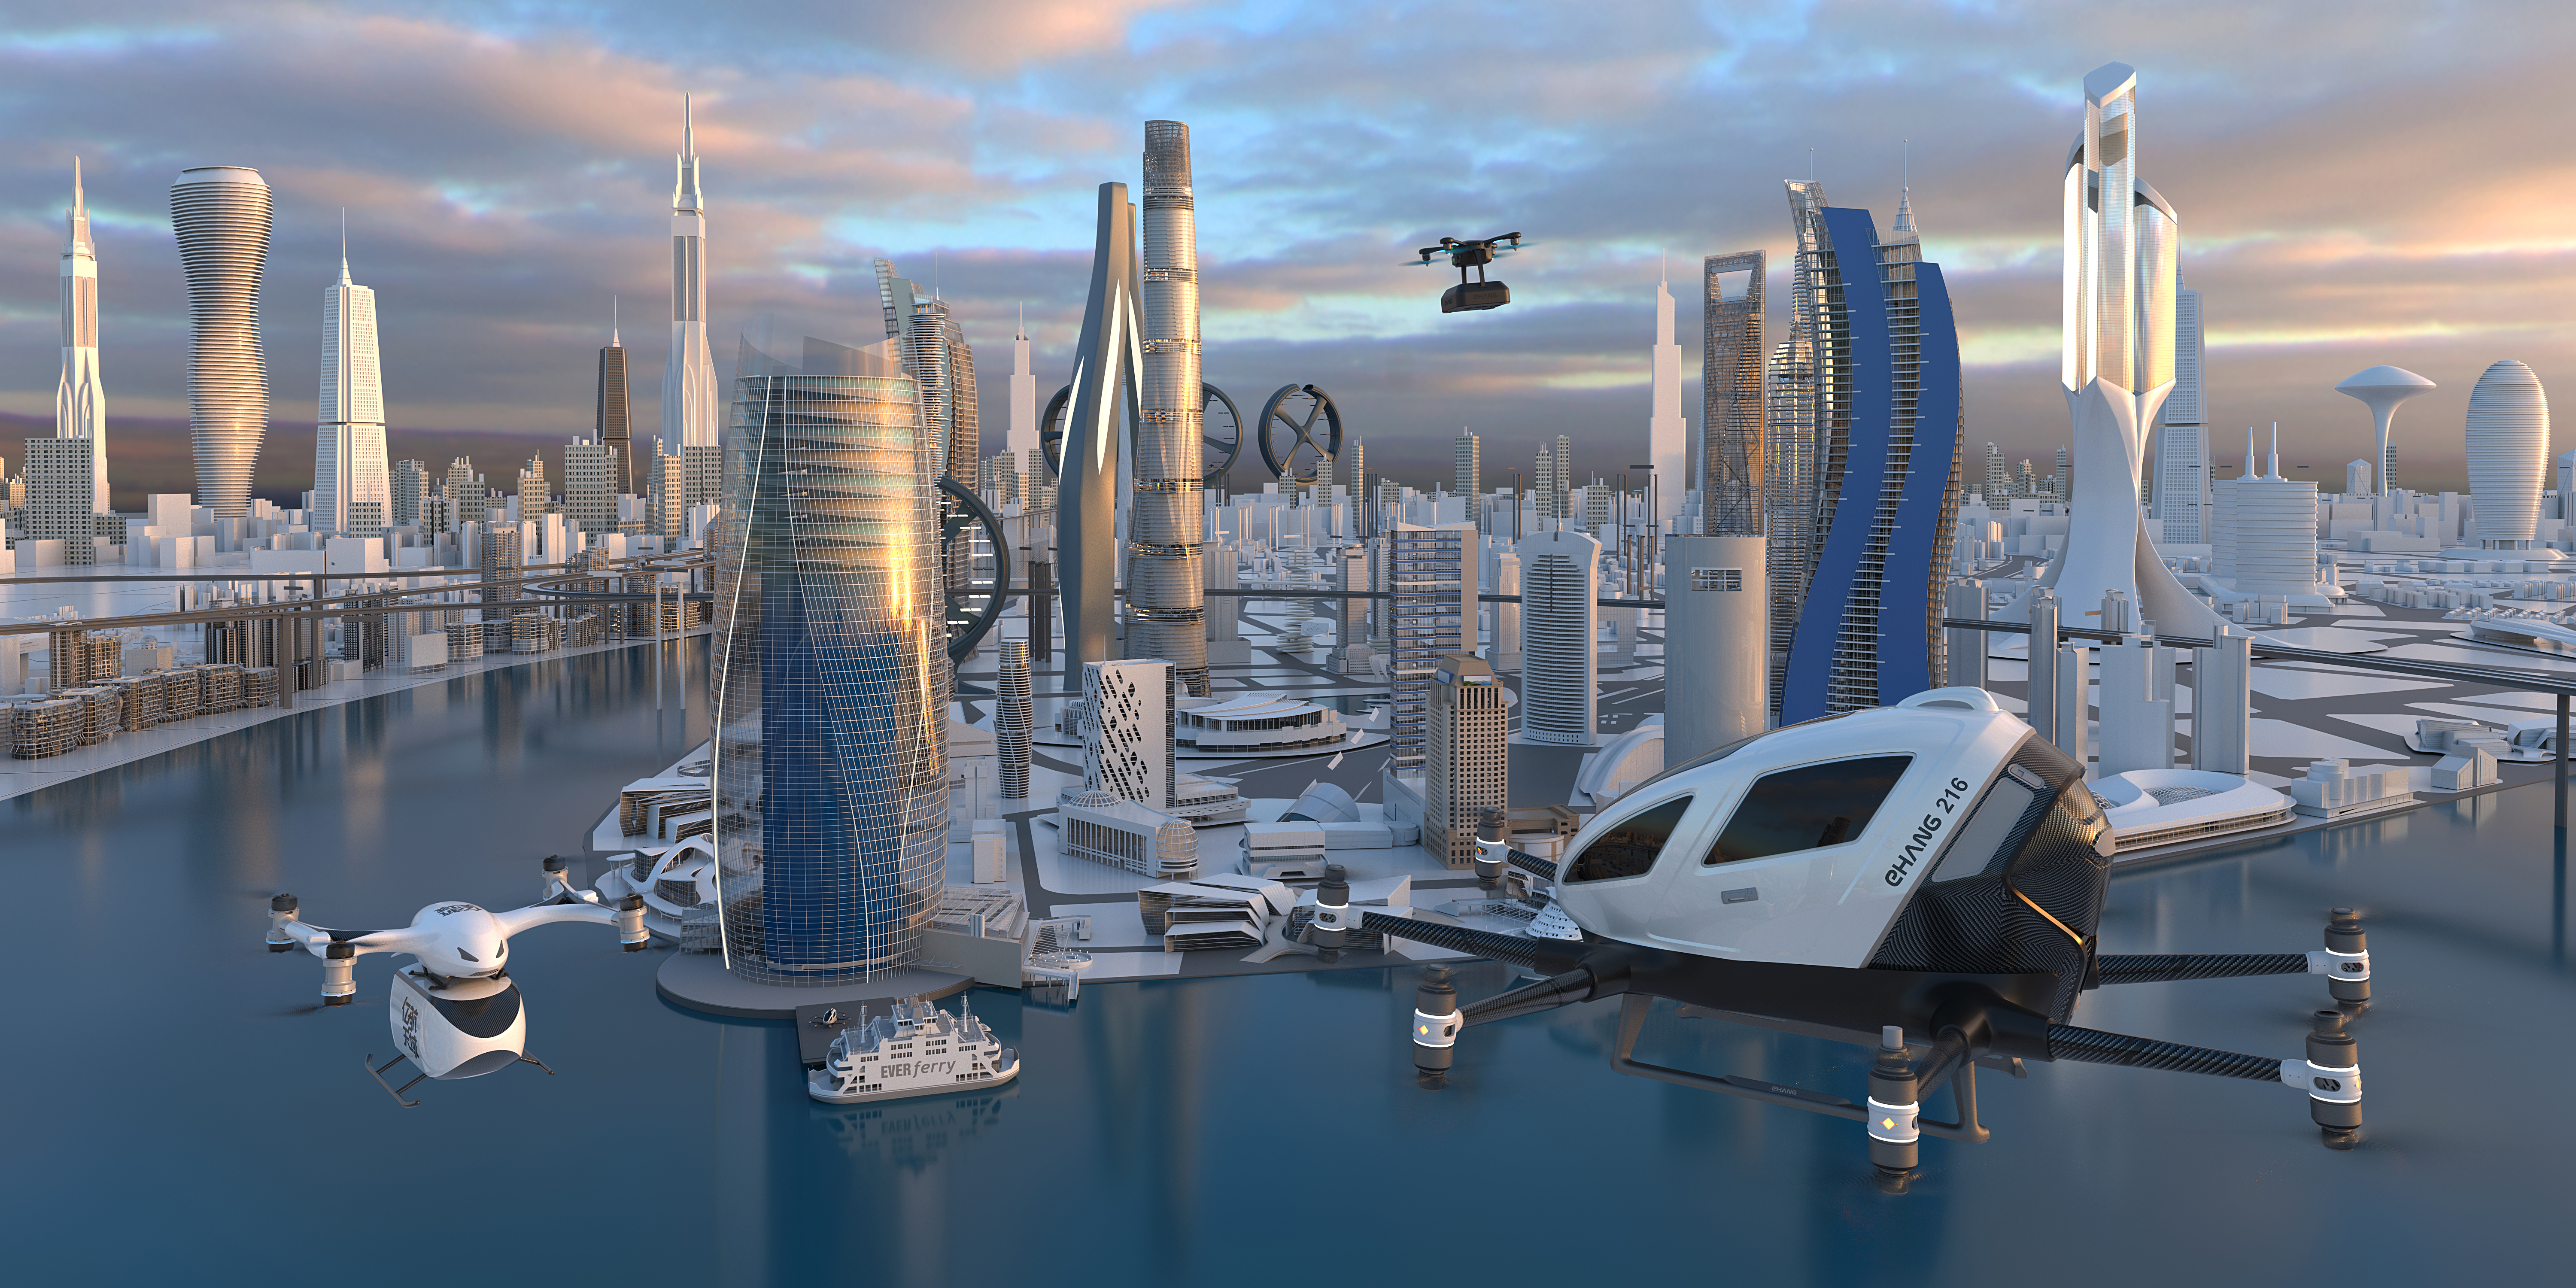 Urban Air Mobility leading by EHang AAV_01